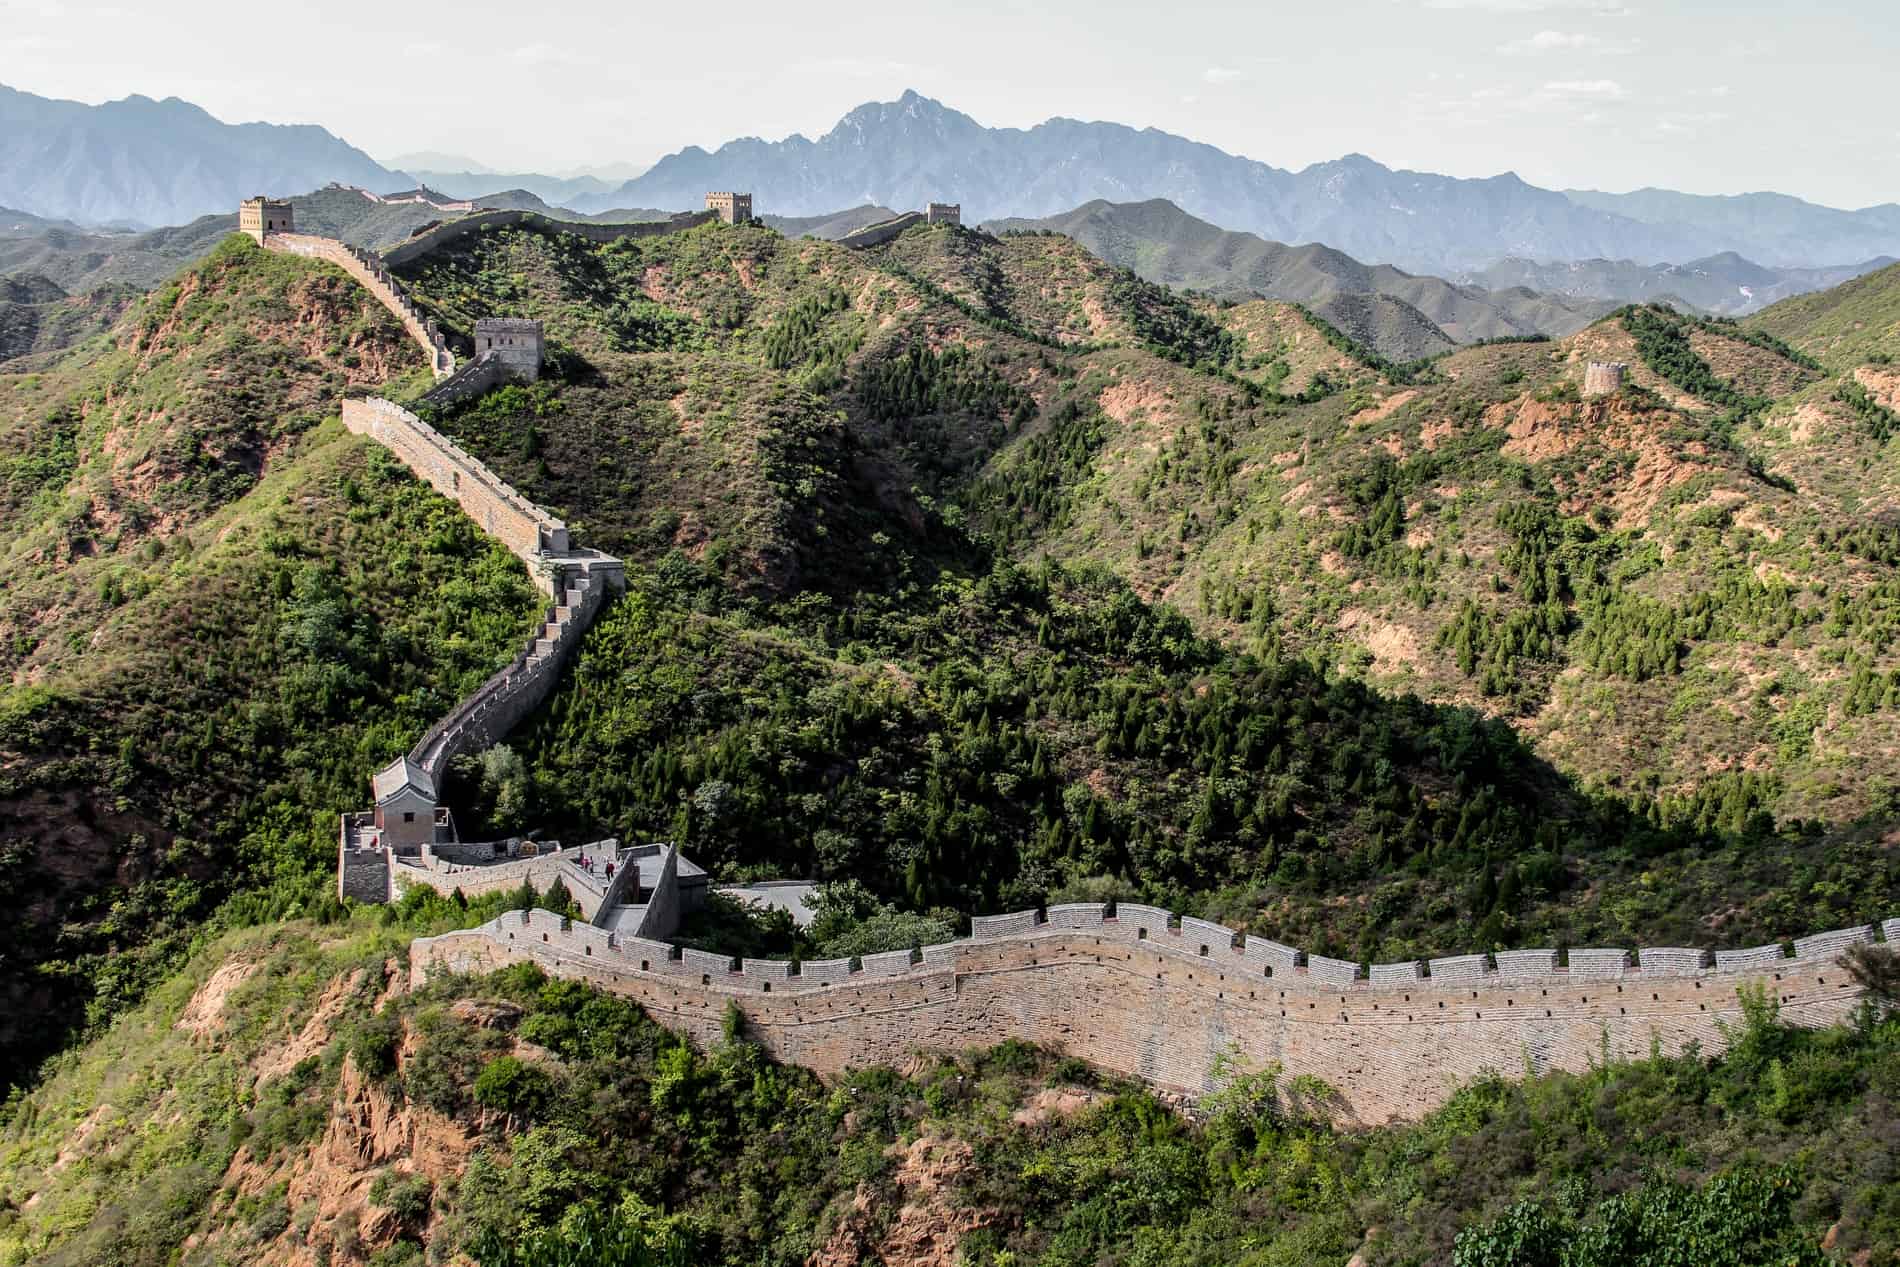 The Great Wall of China cutting a path through rolling green hills. 